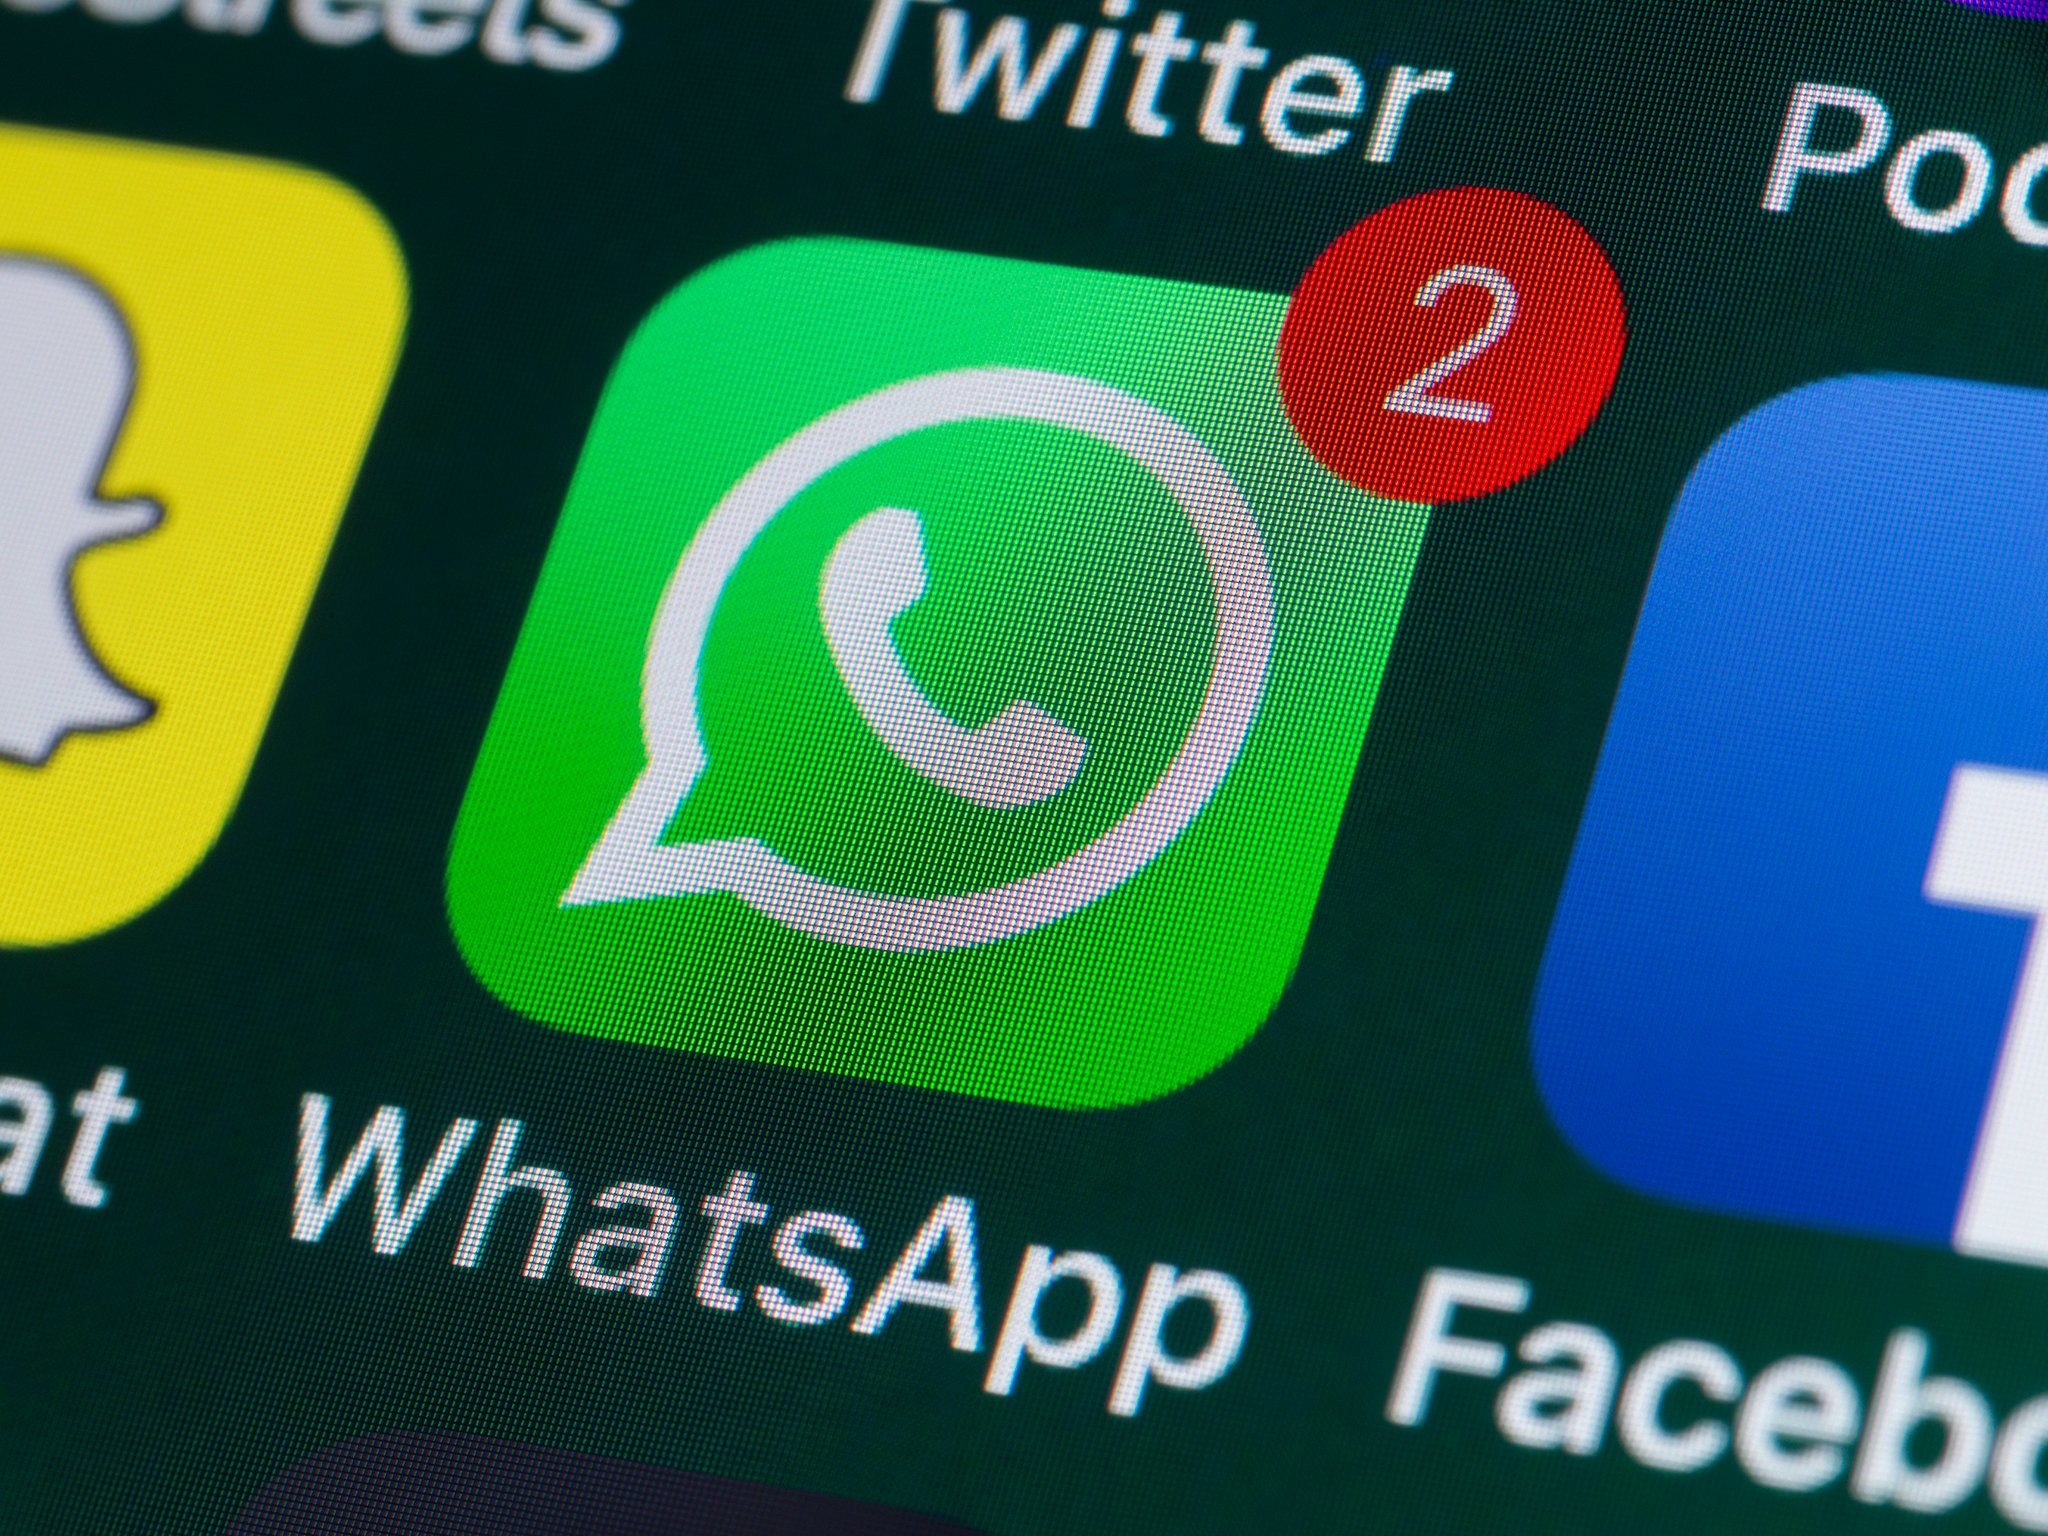 Whatsapp: New updates allows multiple devices to use the same account